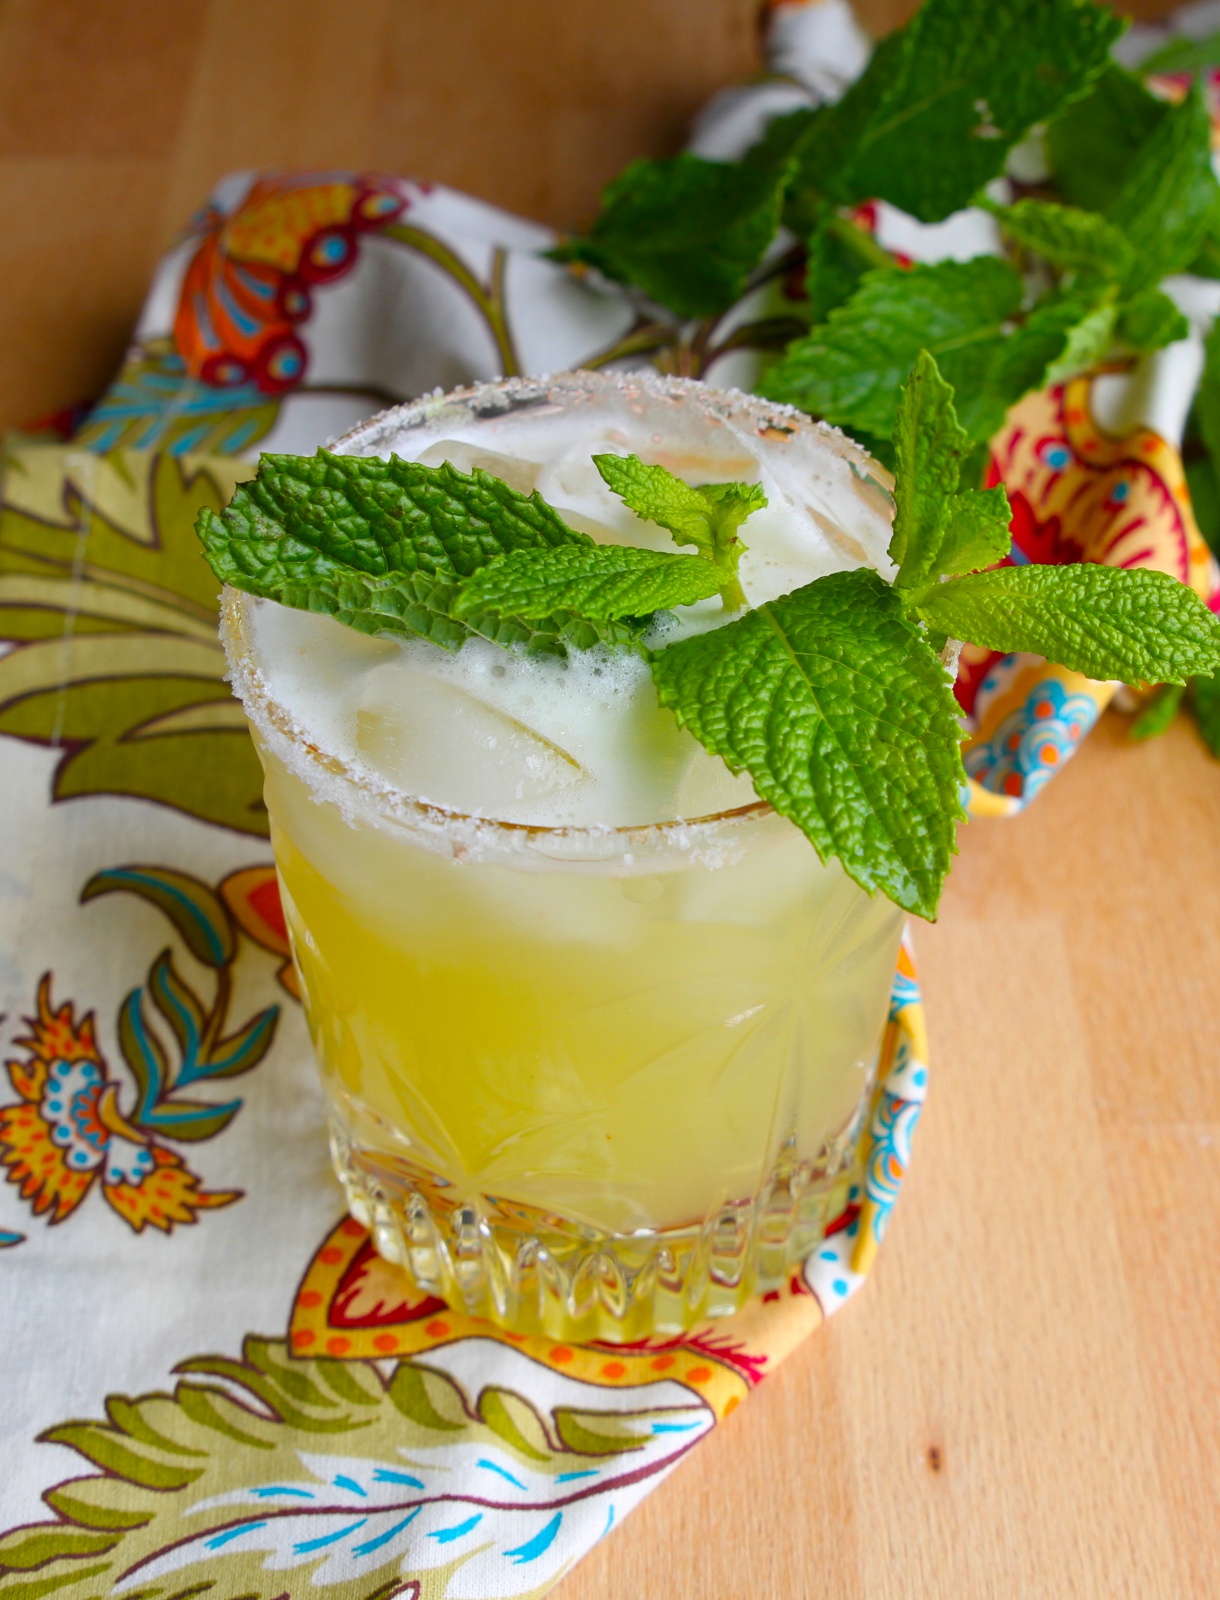 Spicy Pineapple Tequila Smash